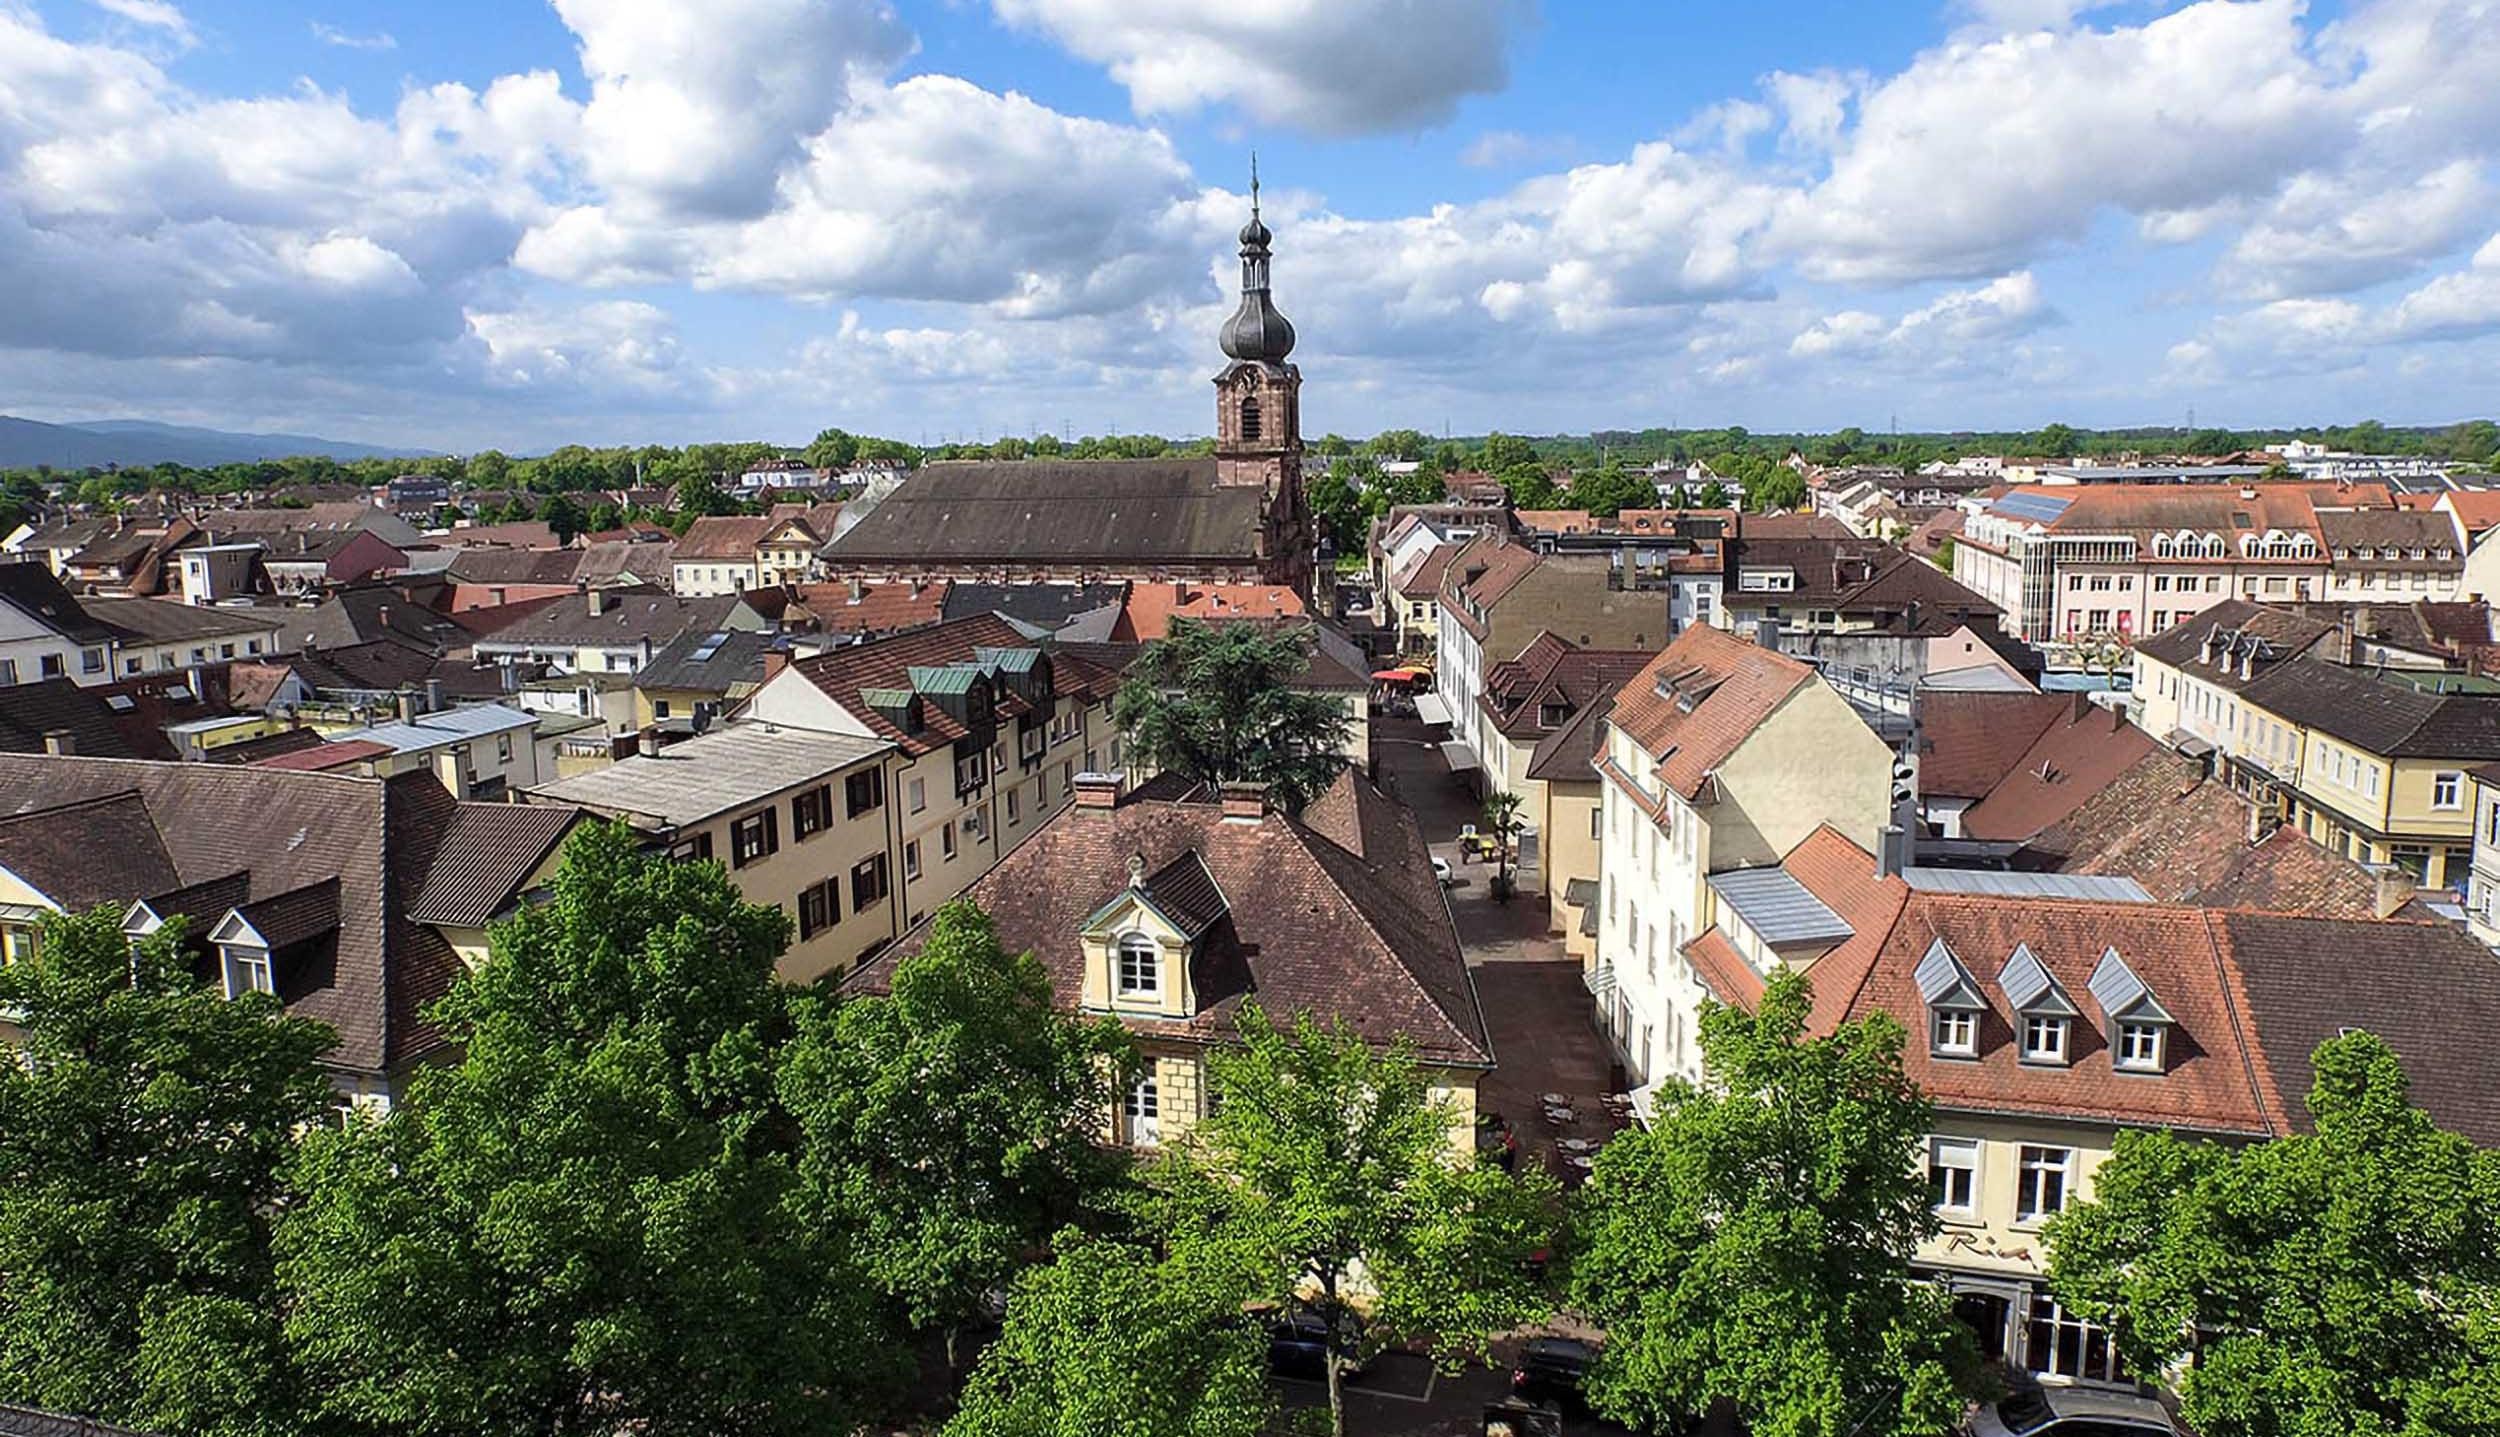 Rastatt from above with view of the city center